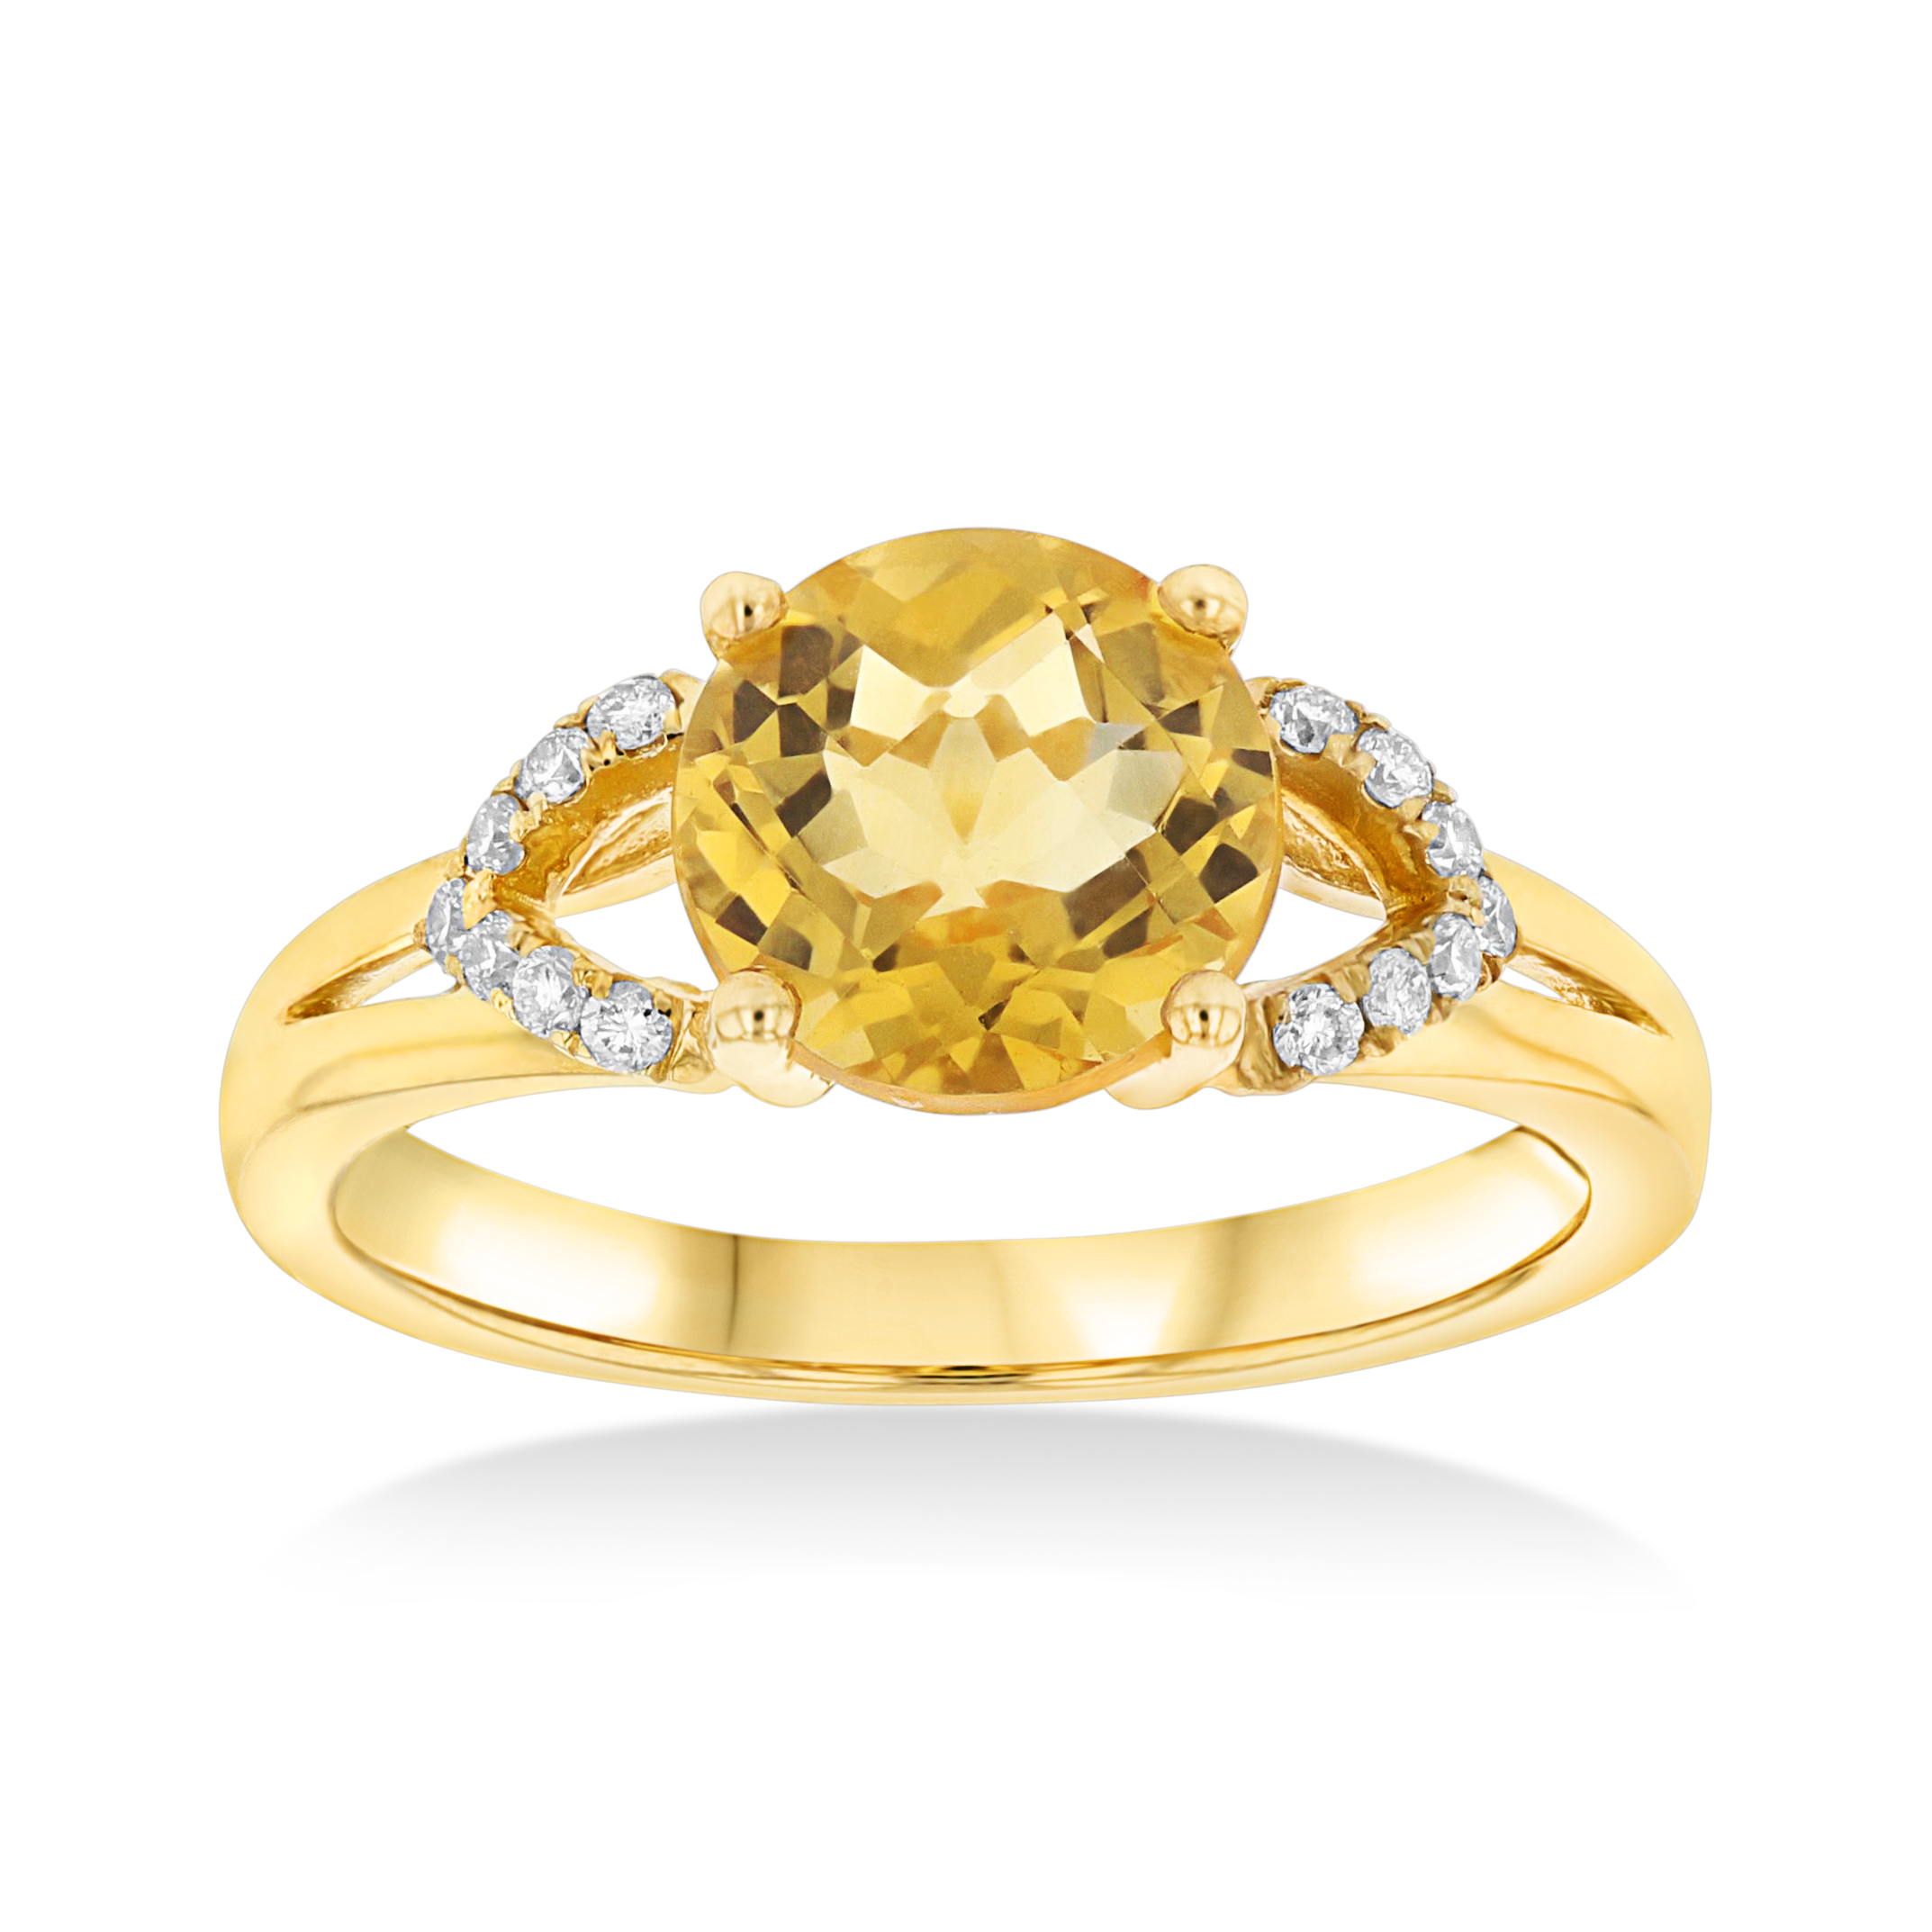 View 0.12ctw Diamond and Citrine Fashion ring in 18k YG